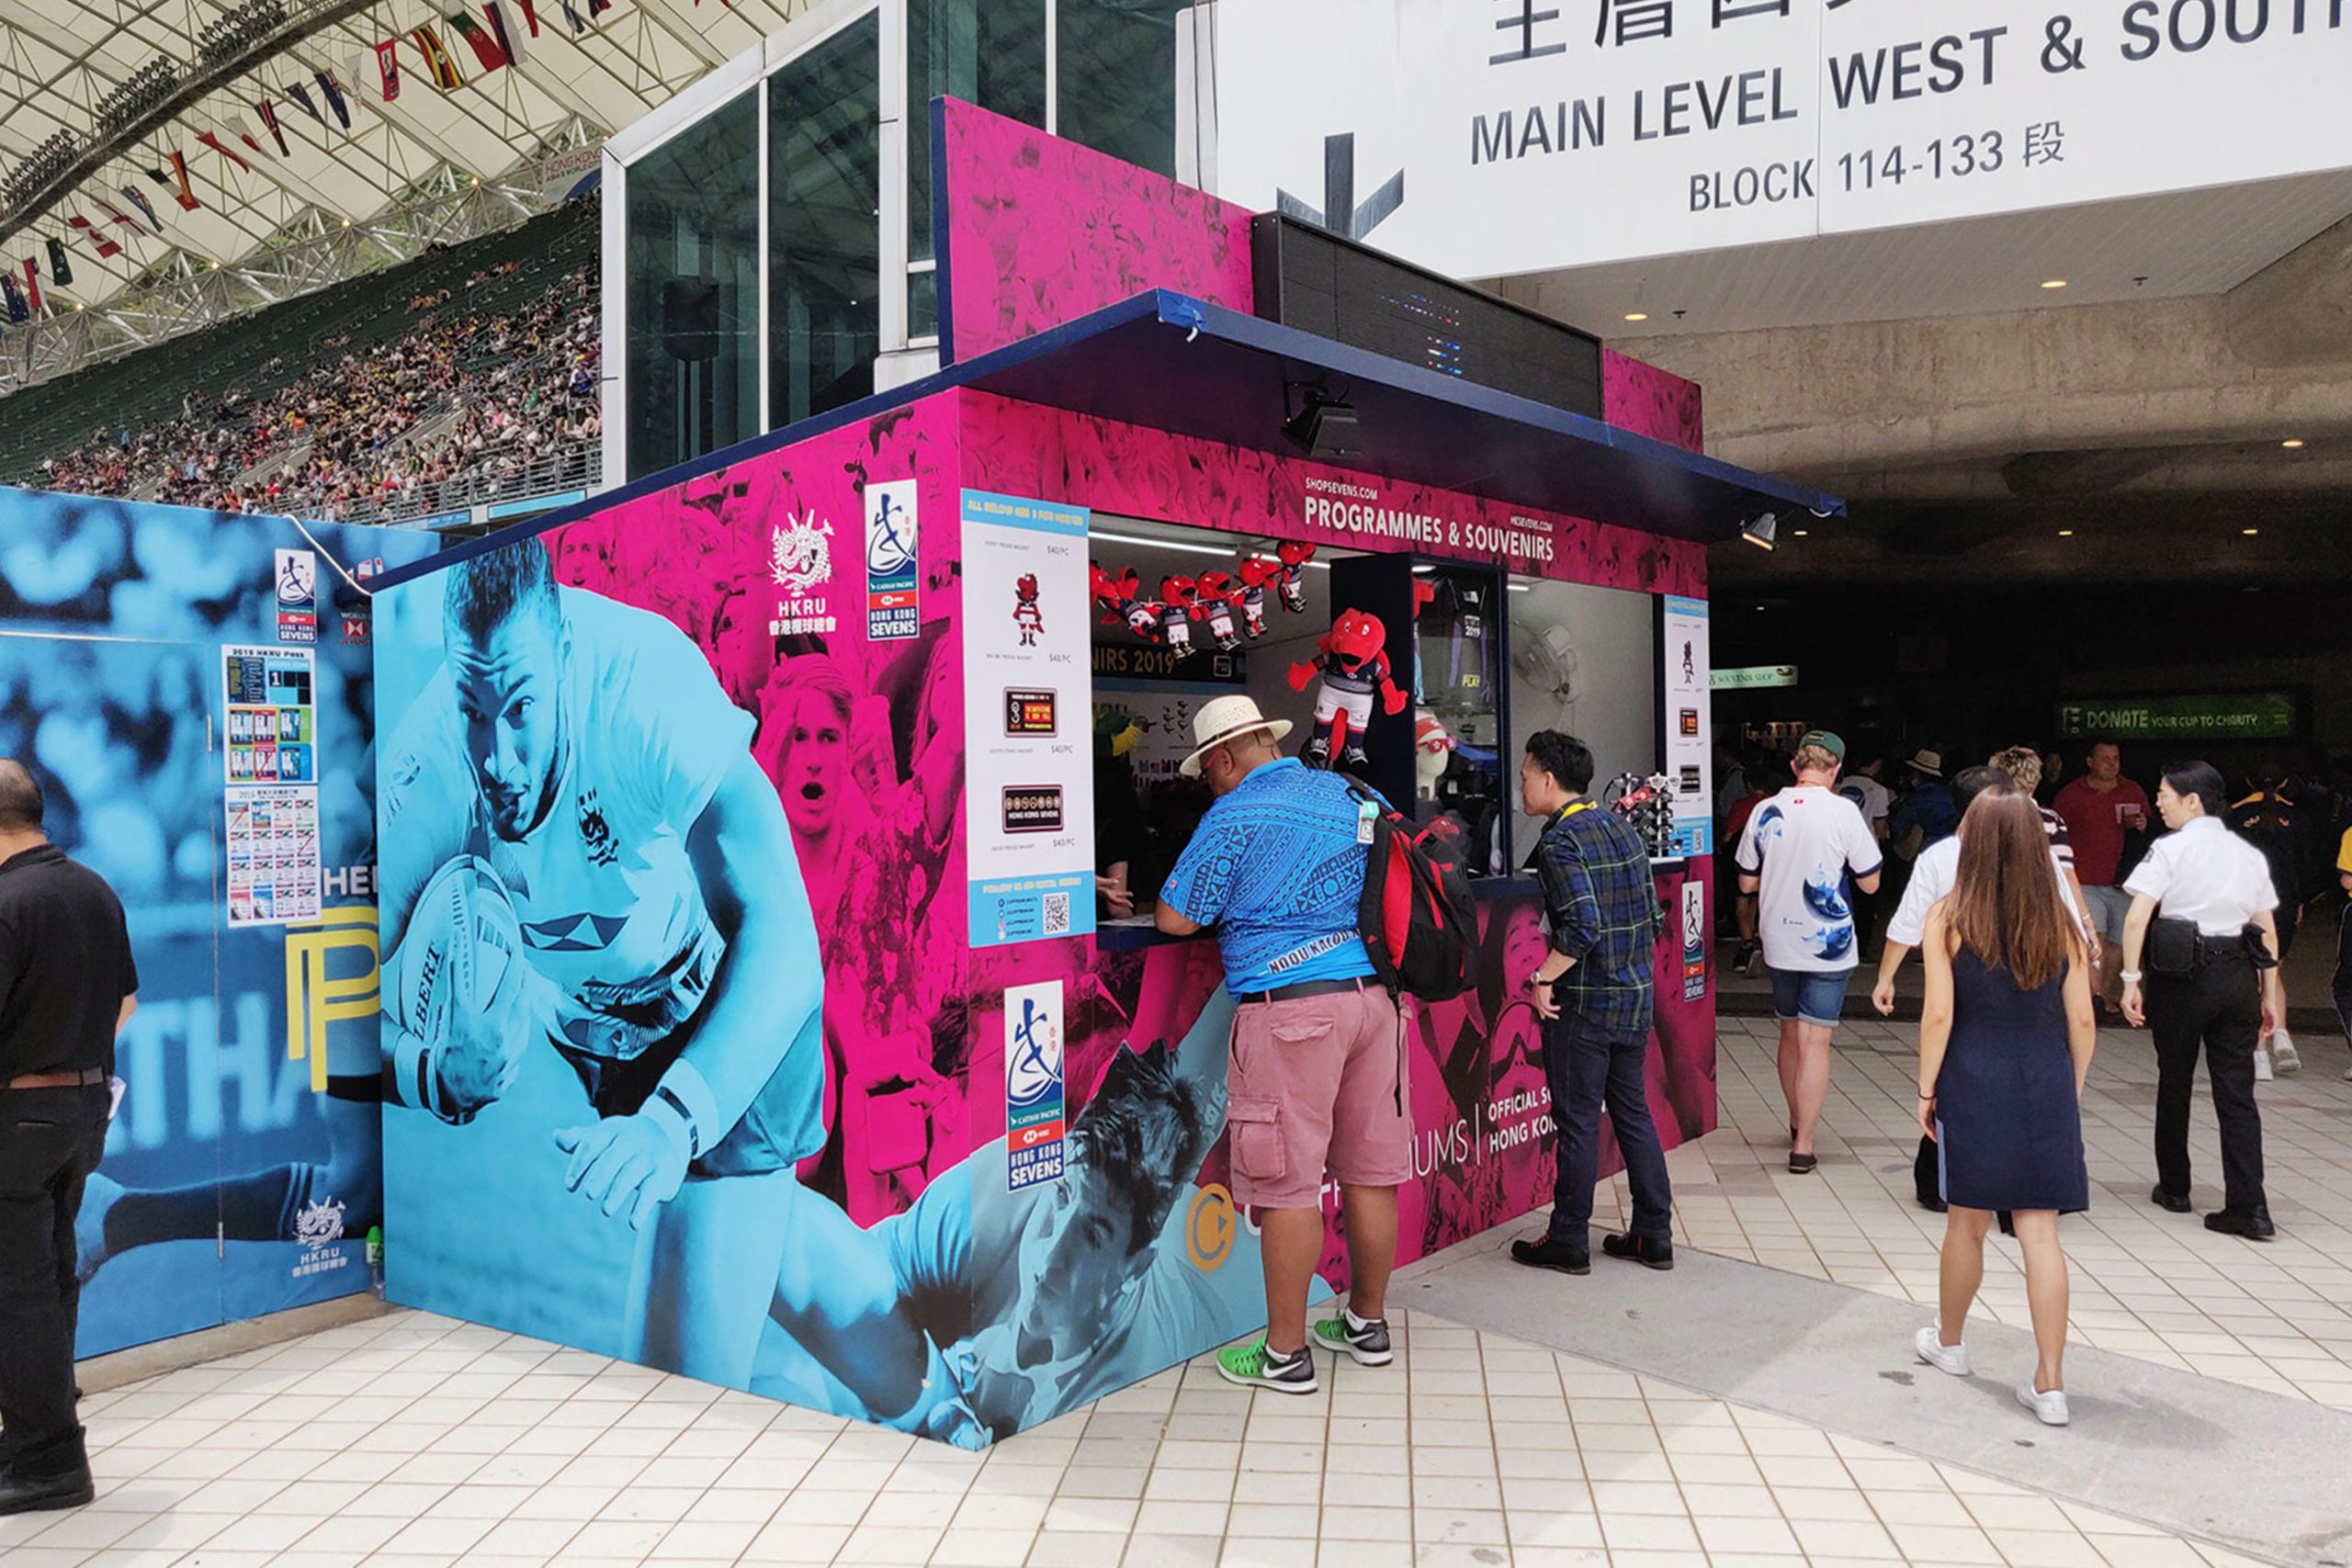 Hong Kong Sevens ticket booth in front of the stadium